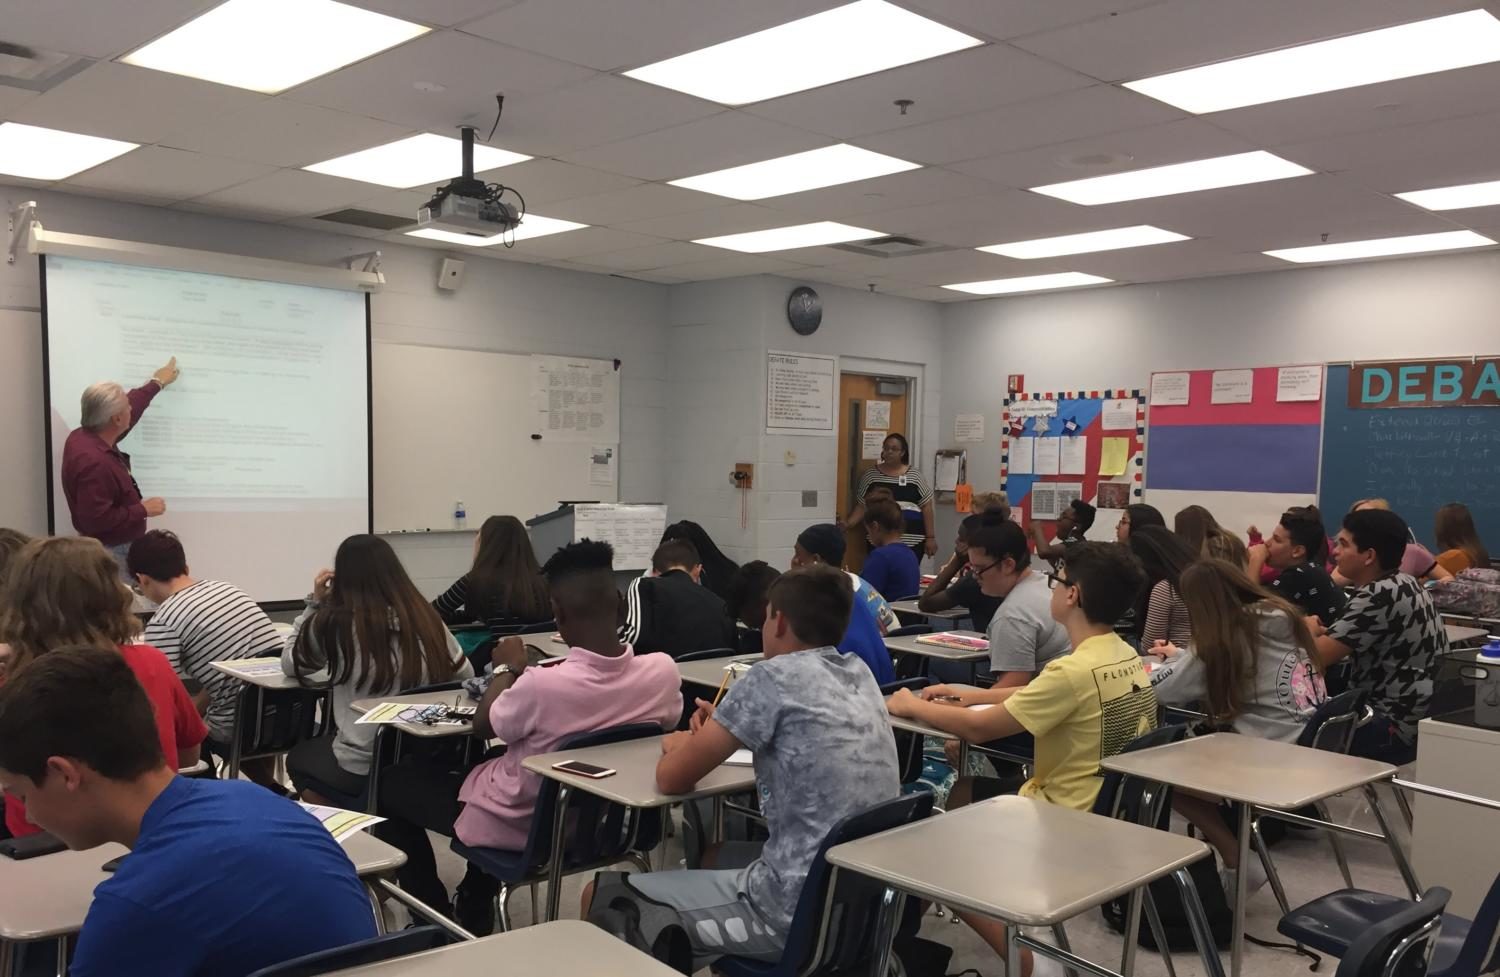 In room 7-221 on Wednesday August 23, debate and speech teacher Dan Smith leads his students on a debate topic. Debate class allows students to broaden their understandings on other opinions.